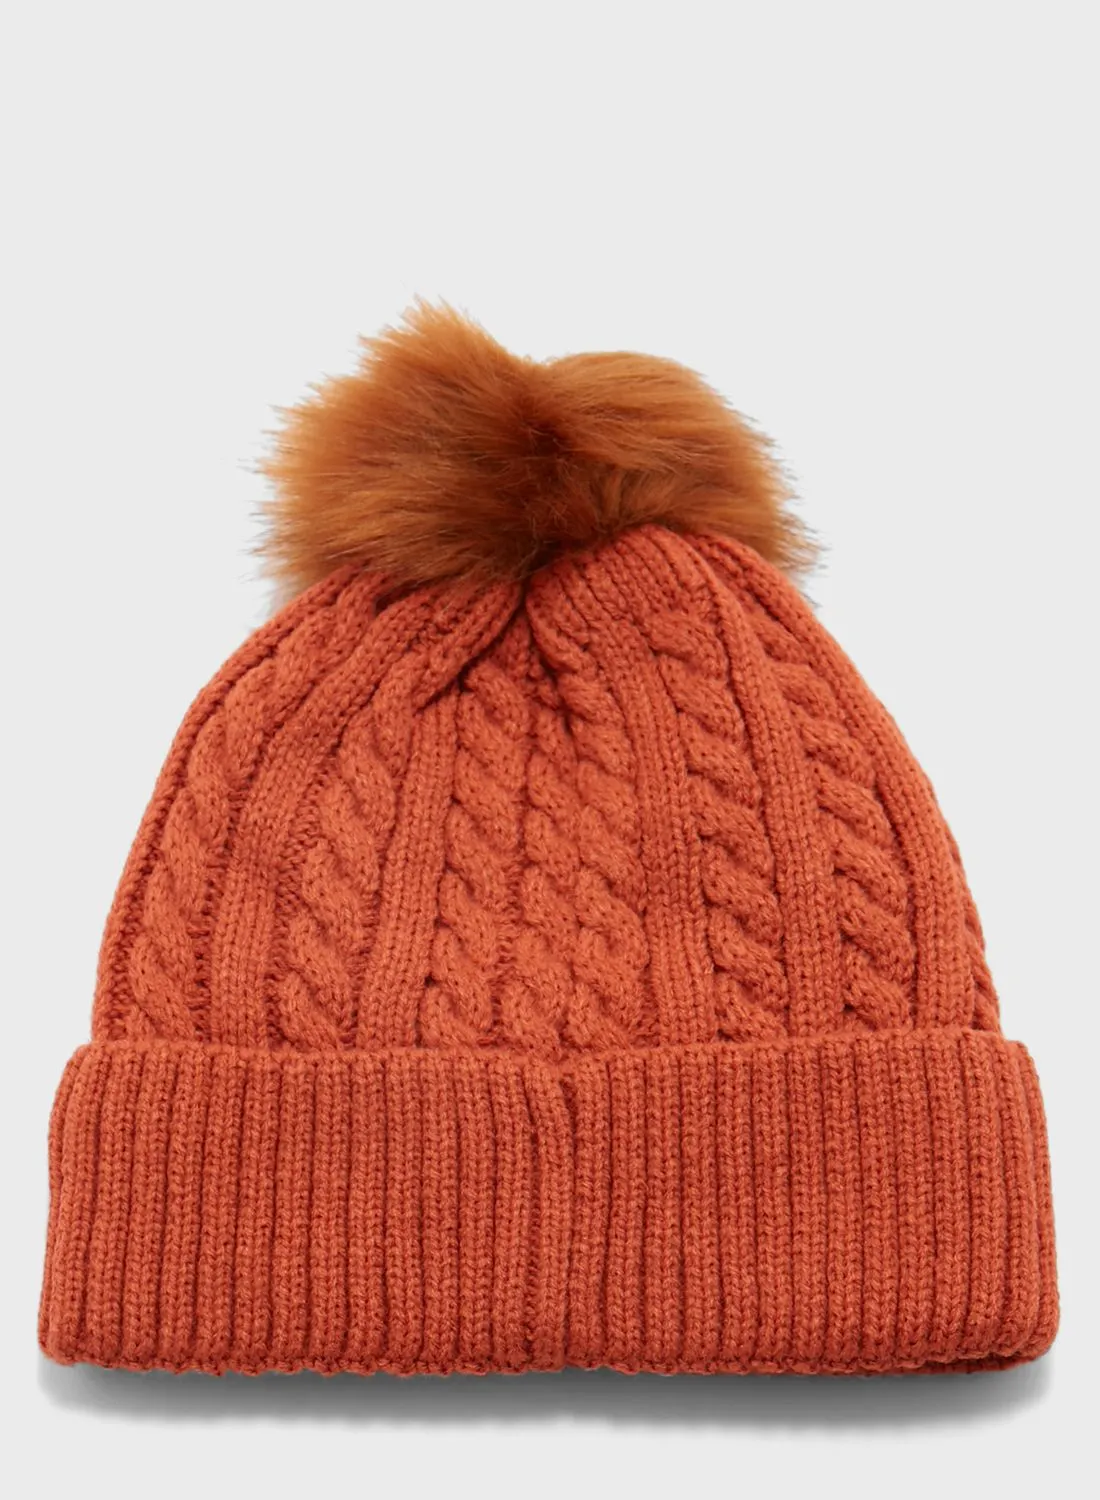 Ginger Cable Knit Winter Beanie